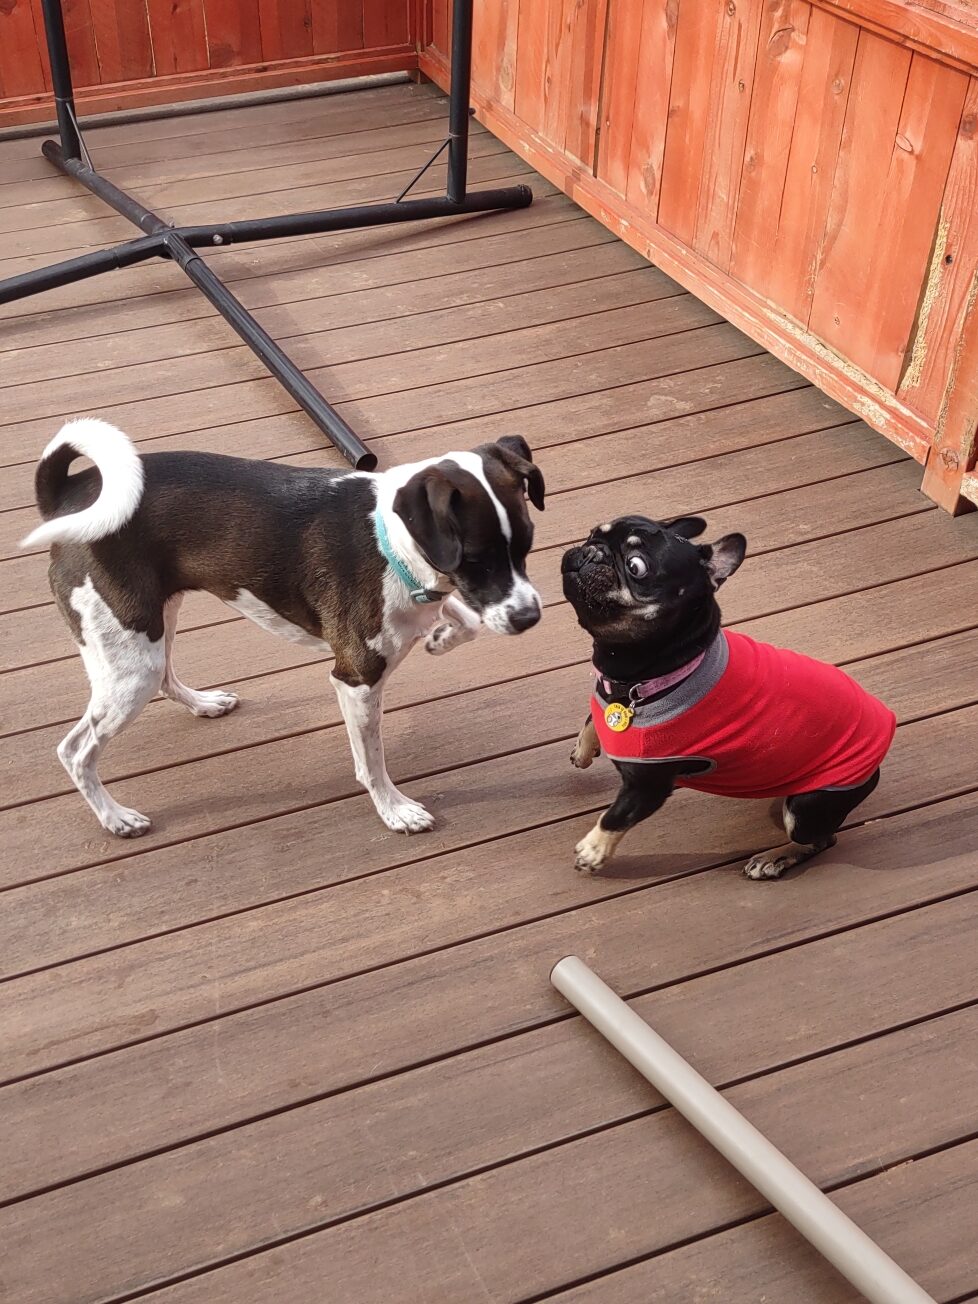 Two dogs play on outdoor deck 